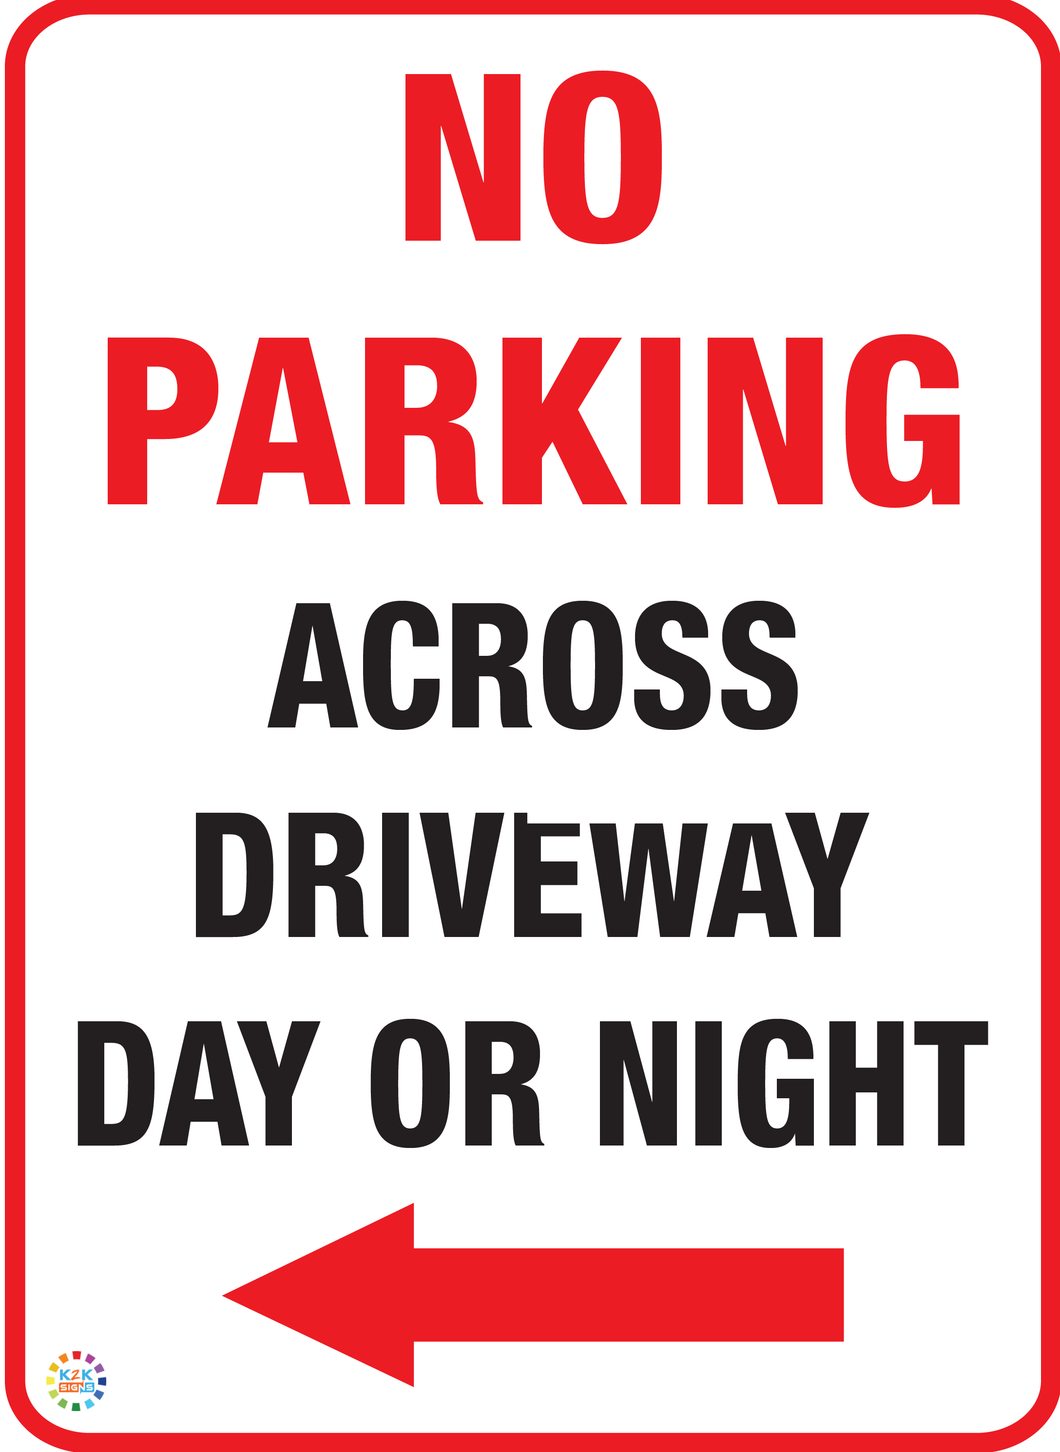 No Parking Across Driveway Day Or Night - Left Arrow Sign